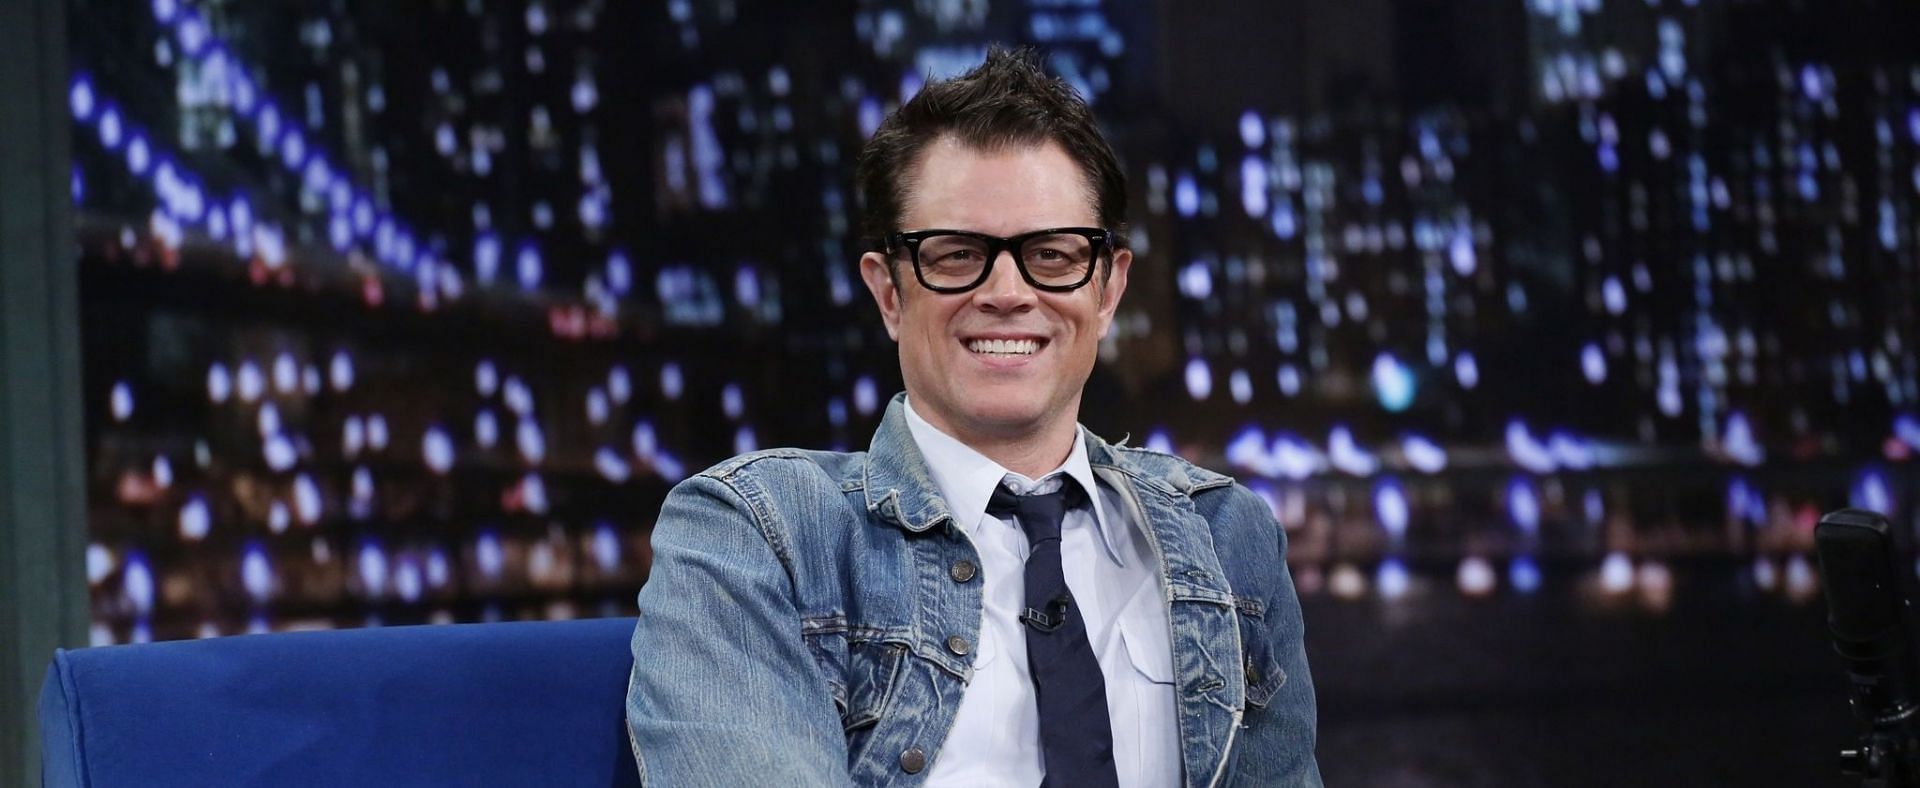 Johnny Knoxville suffered from brain damage after being hit by a bull while performing a stunt (Image via Lloyd Bishop/Getty Images)